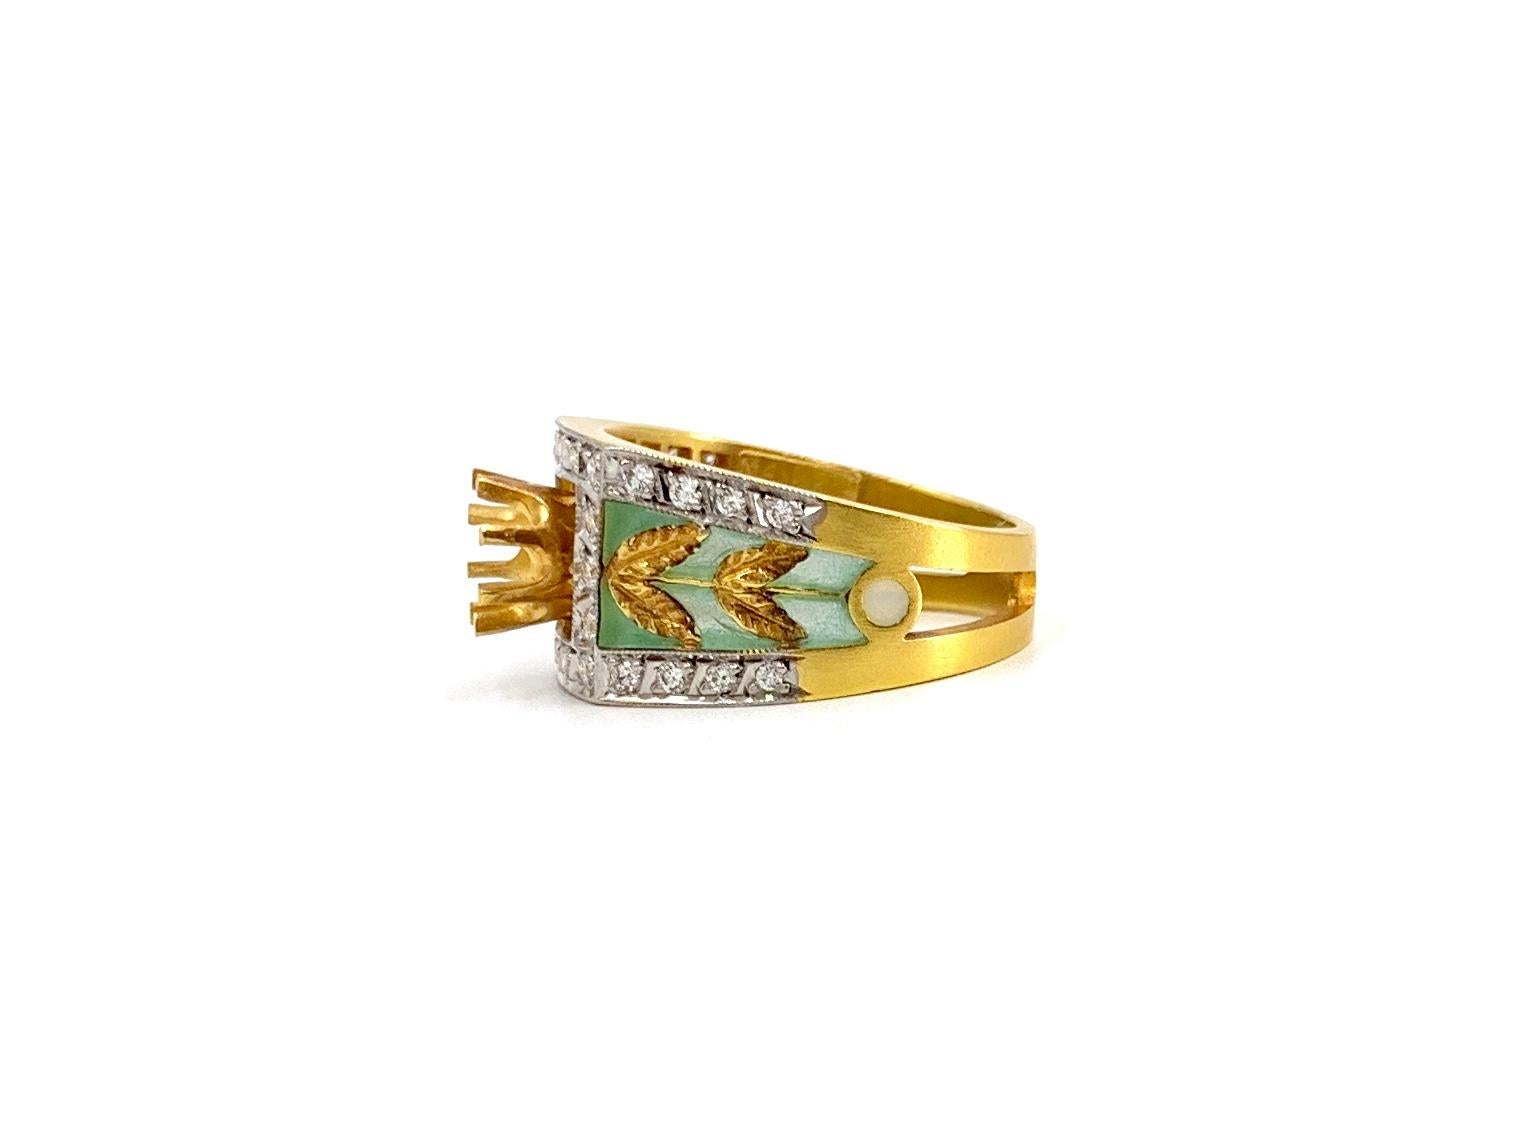 An exquisite and unique Masriera creation. This 18 karat yellow gold ring mounting features hand painted greenish-blue enamel reminiscent of stained glass in a leaf motif, high quality diamonds and a beautiful satin-brushed finish throughout.